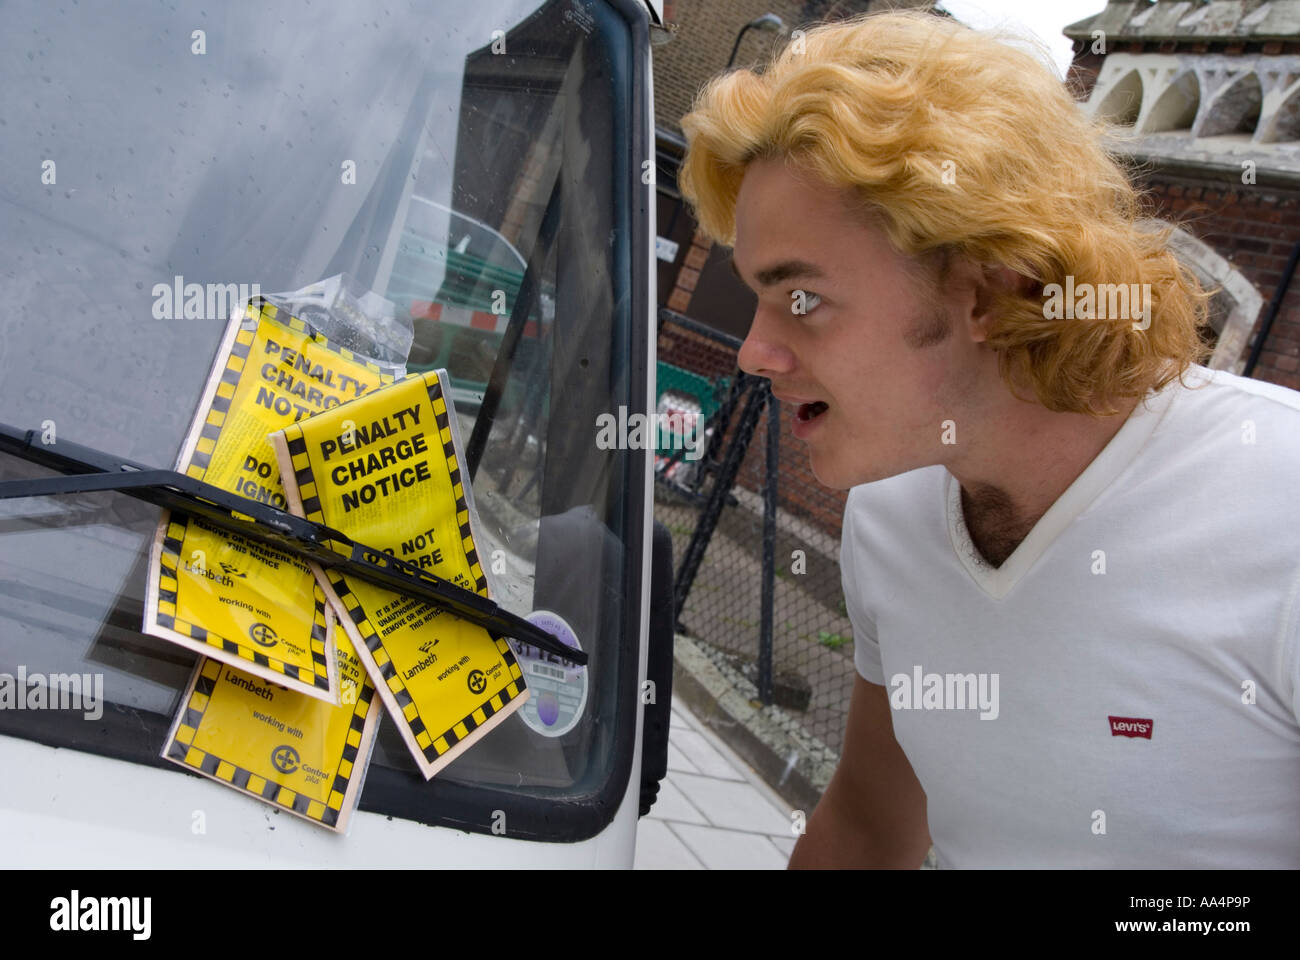 man parking tickets ginger Stock Photo